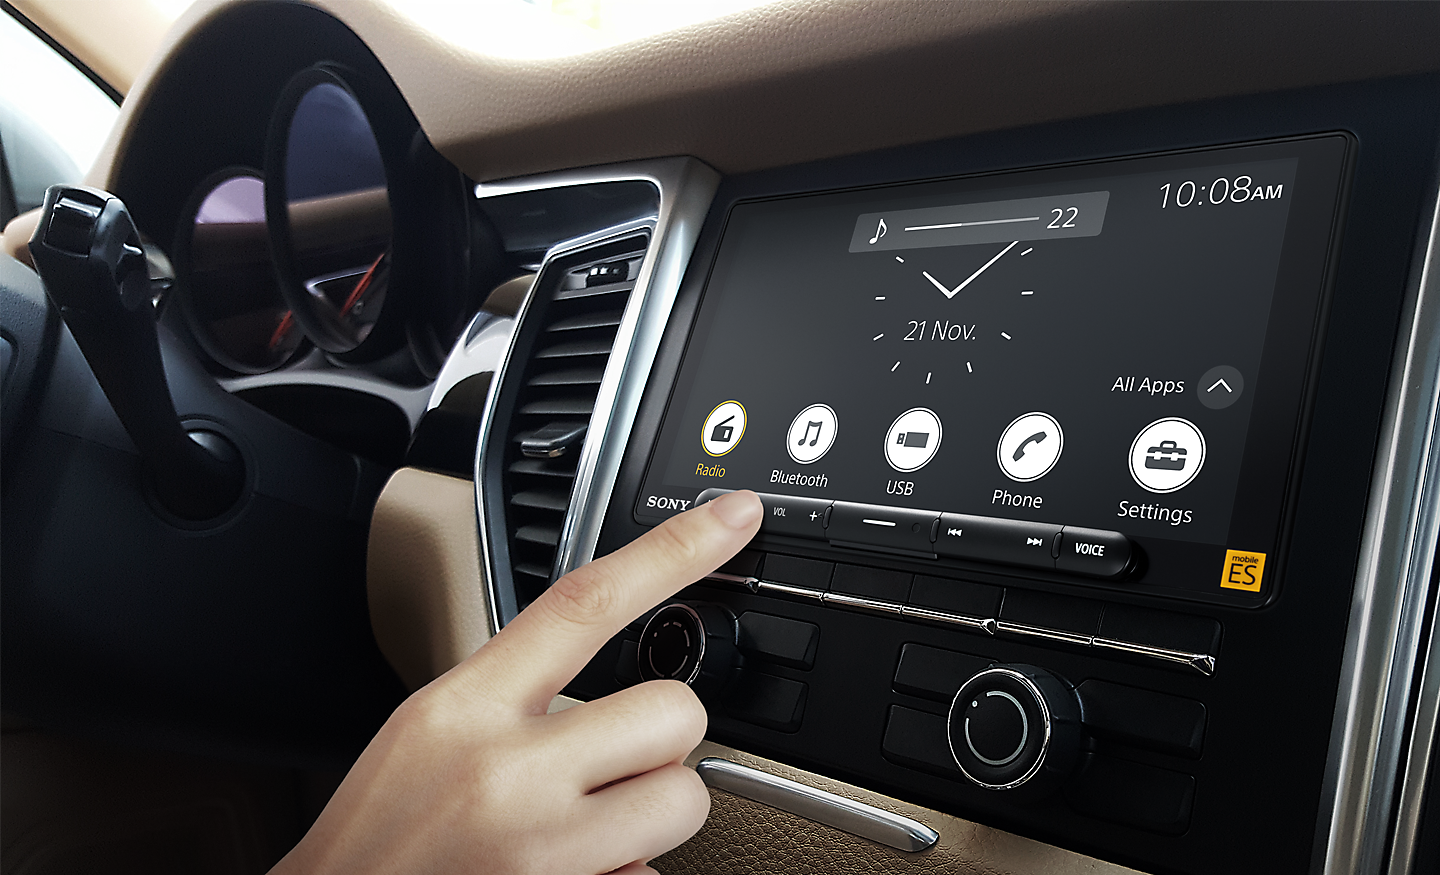 Interior of a car showing a user interacting with the XAV-900ES media receiver.